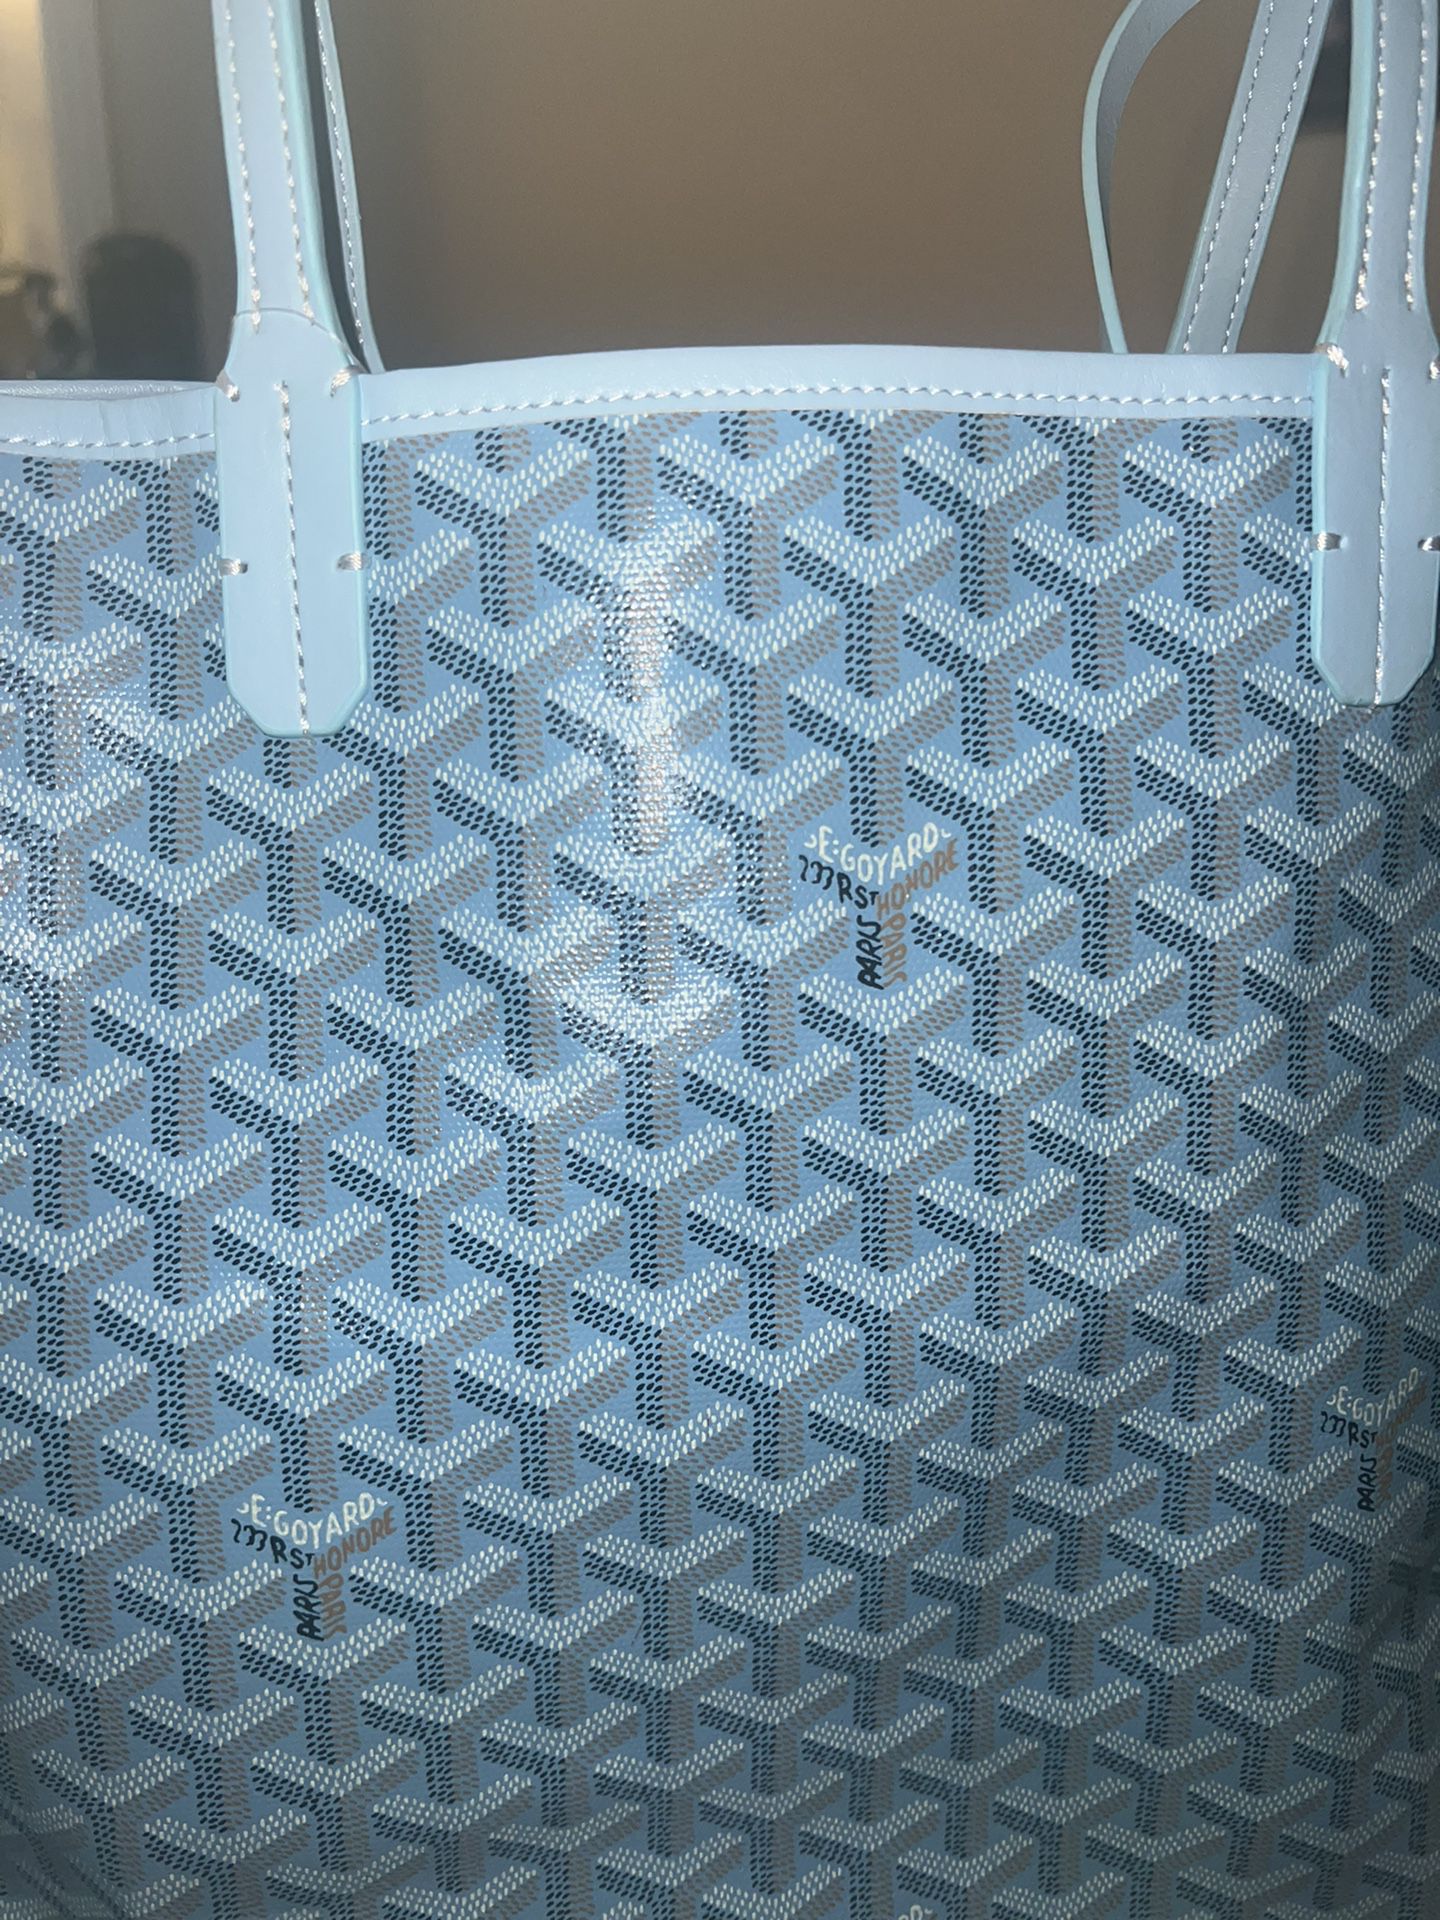 Pending% Authentic Goyard tote PM Size for Sale in San Mateo, CA - OfferUp